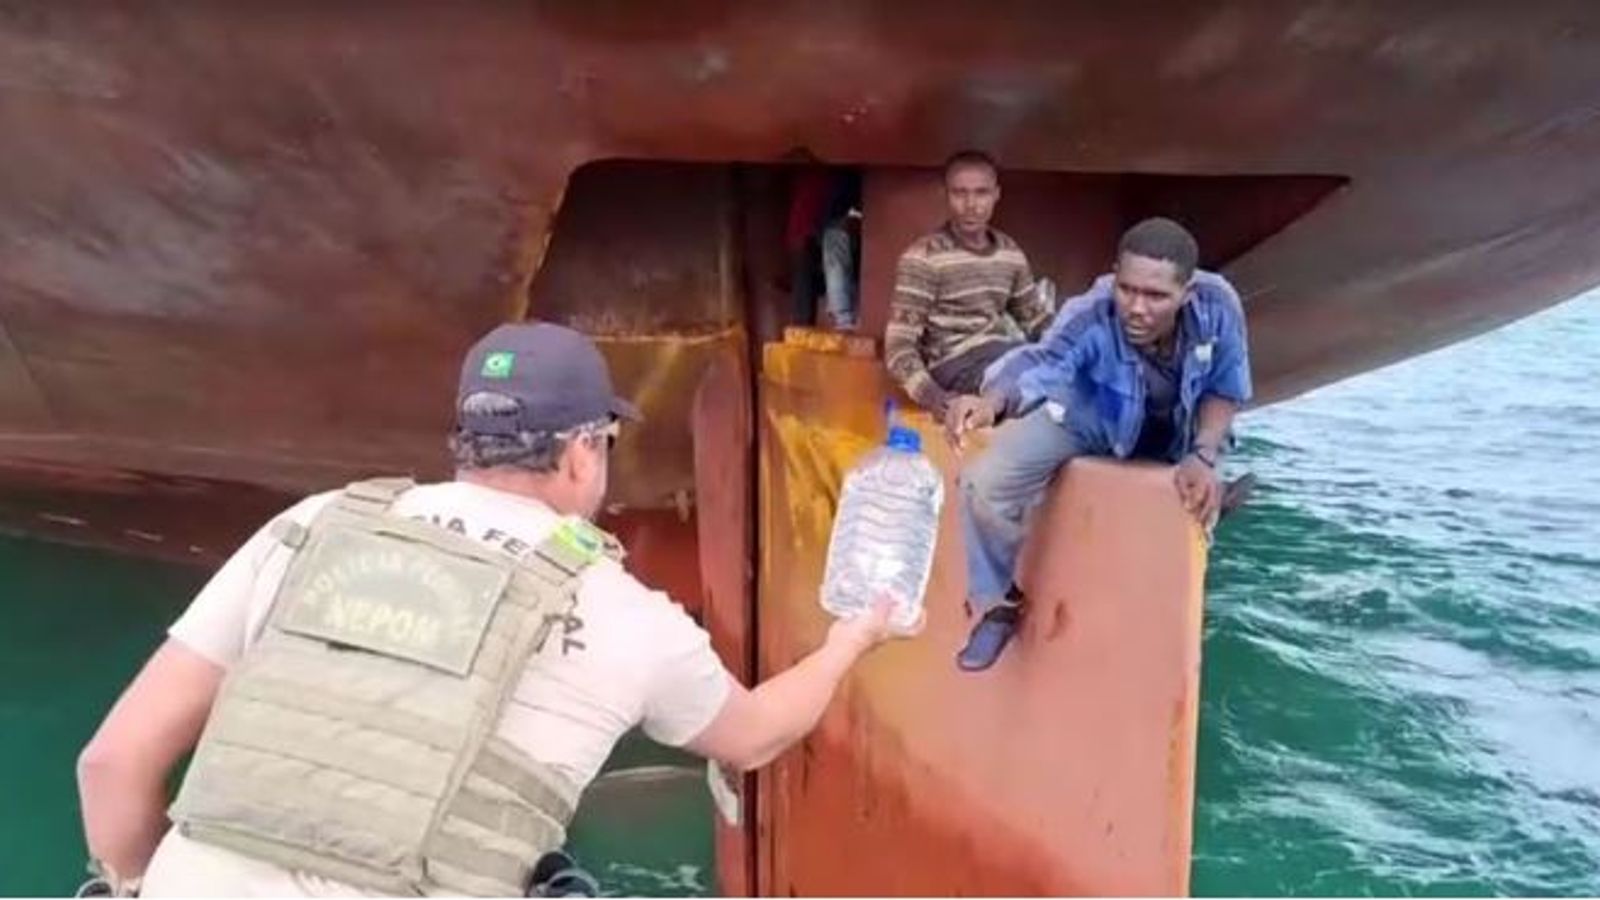 The men were rescued by Brazilian federal police